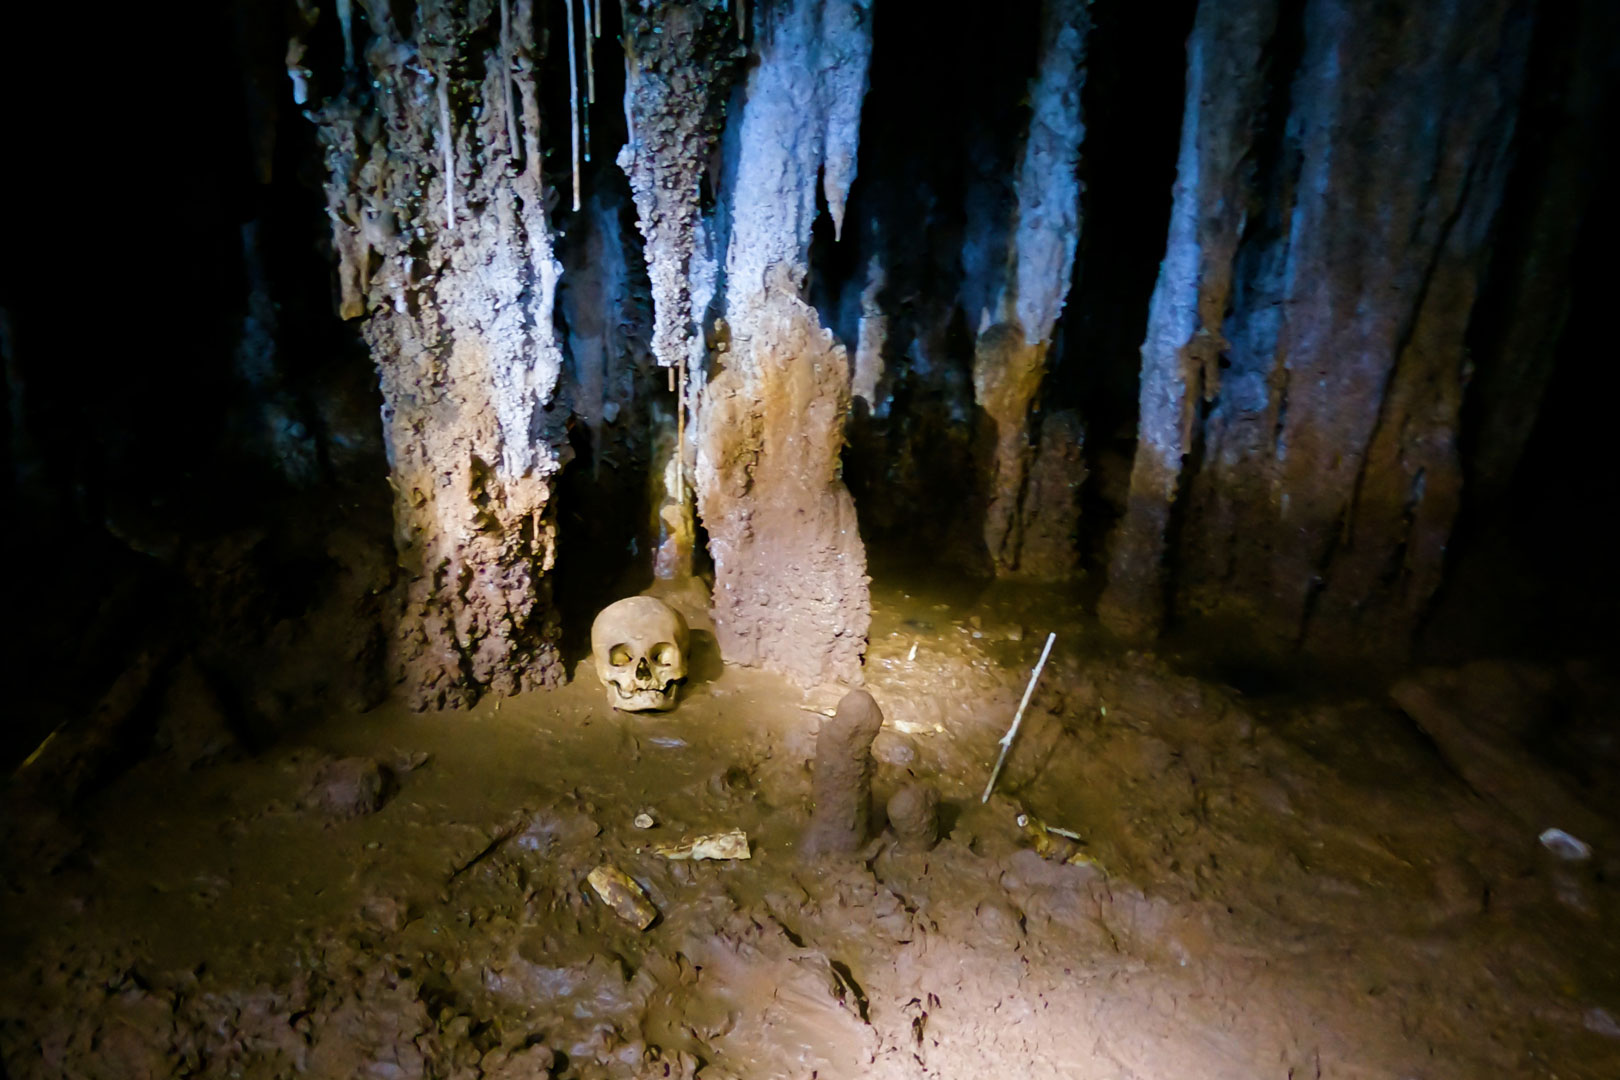 Cave pillars, stalactites, stalagmites and human remains inside the Ceremonial Cave at The Rainforest Lodge at Sleeping Giant